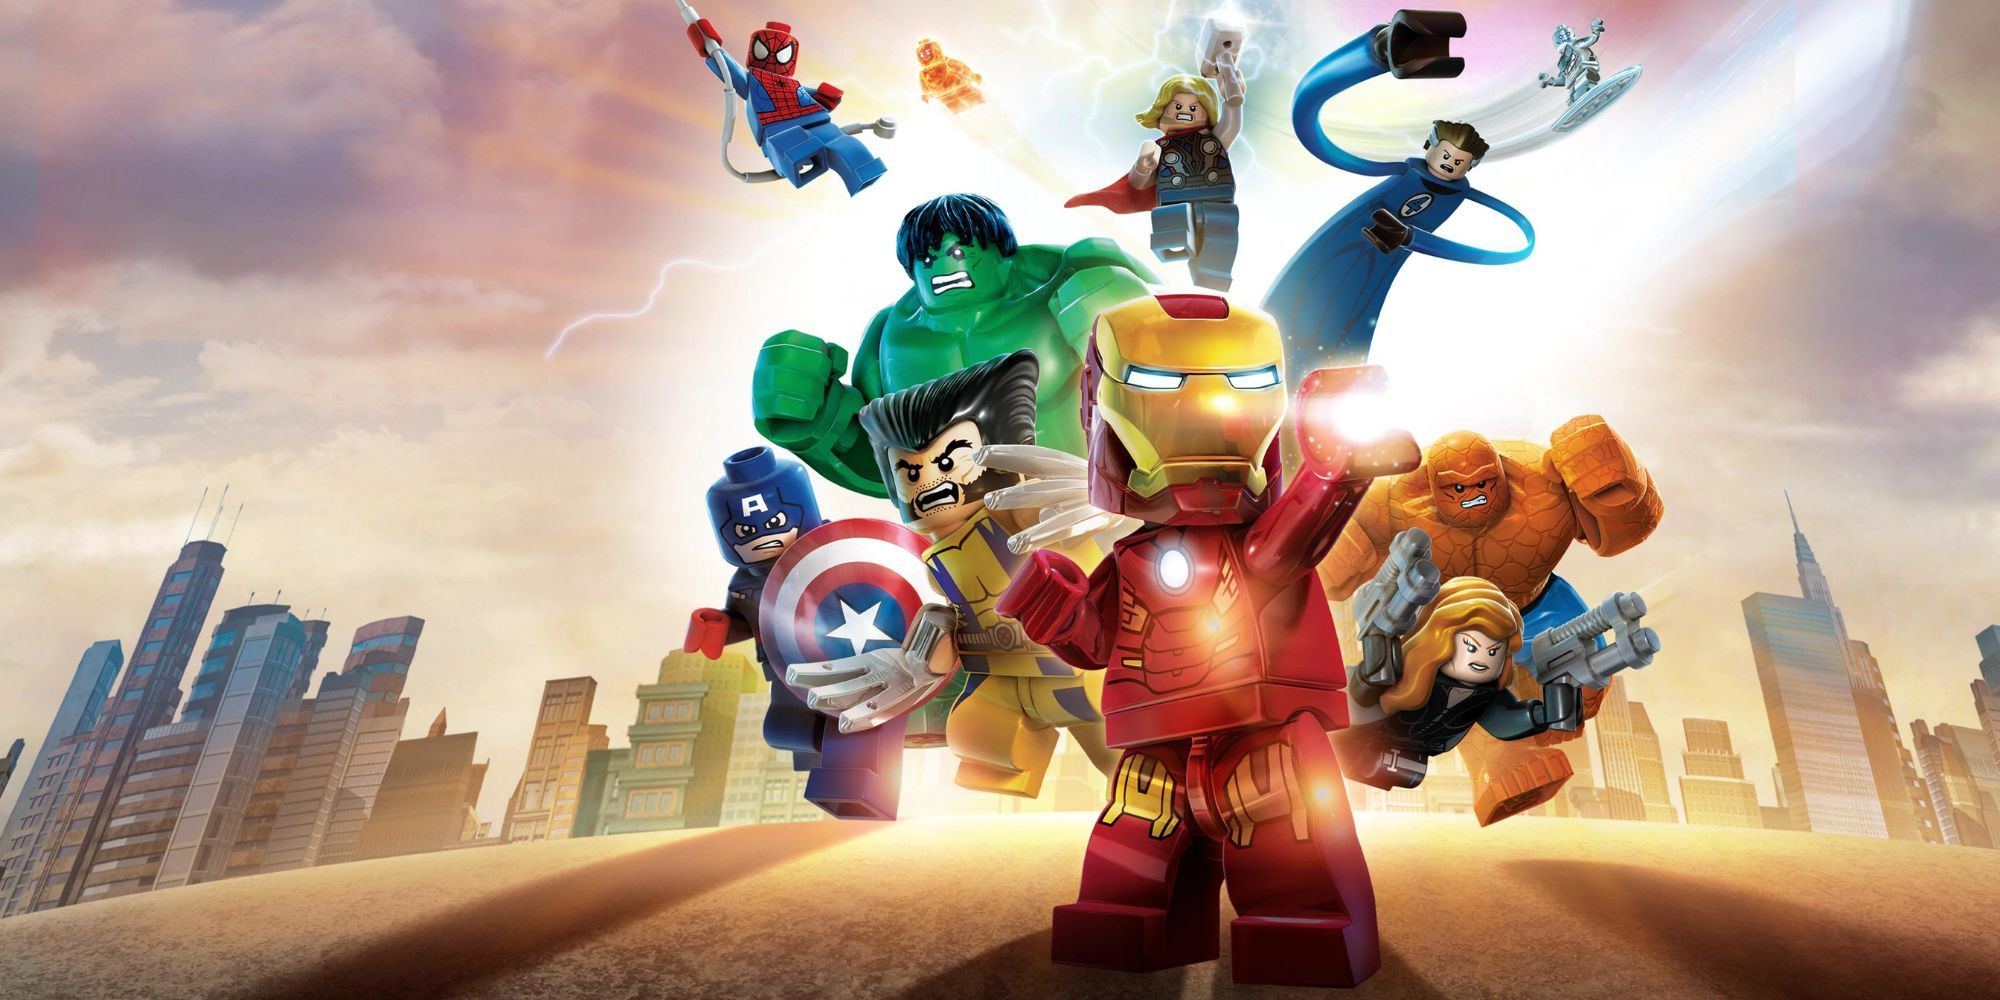 Lego Iron Man, Wolverine, Captain America, Black Widow and more run away from a city